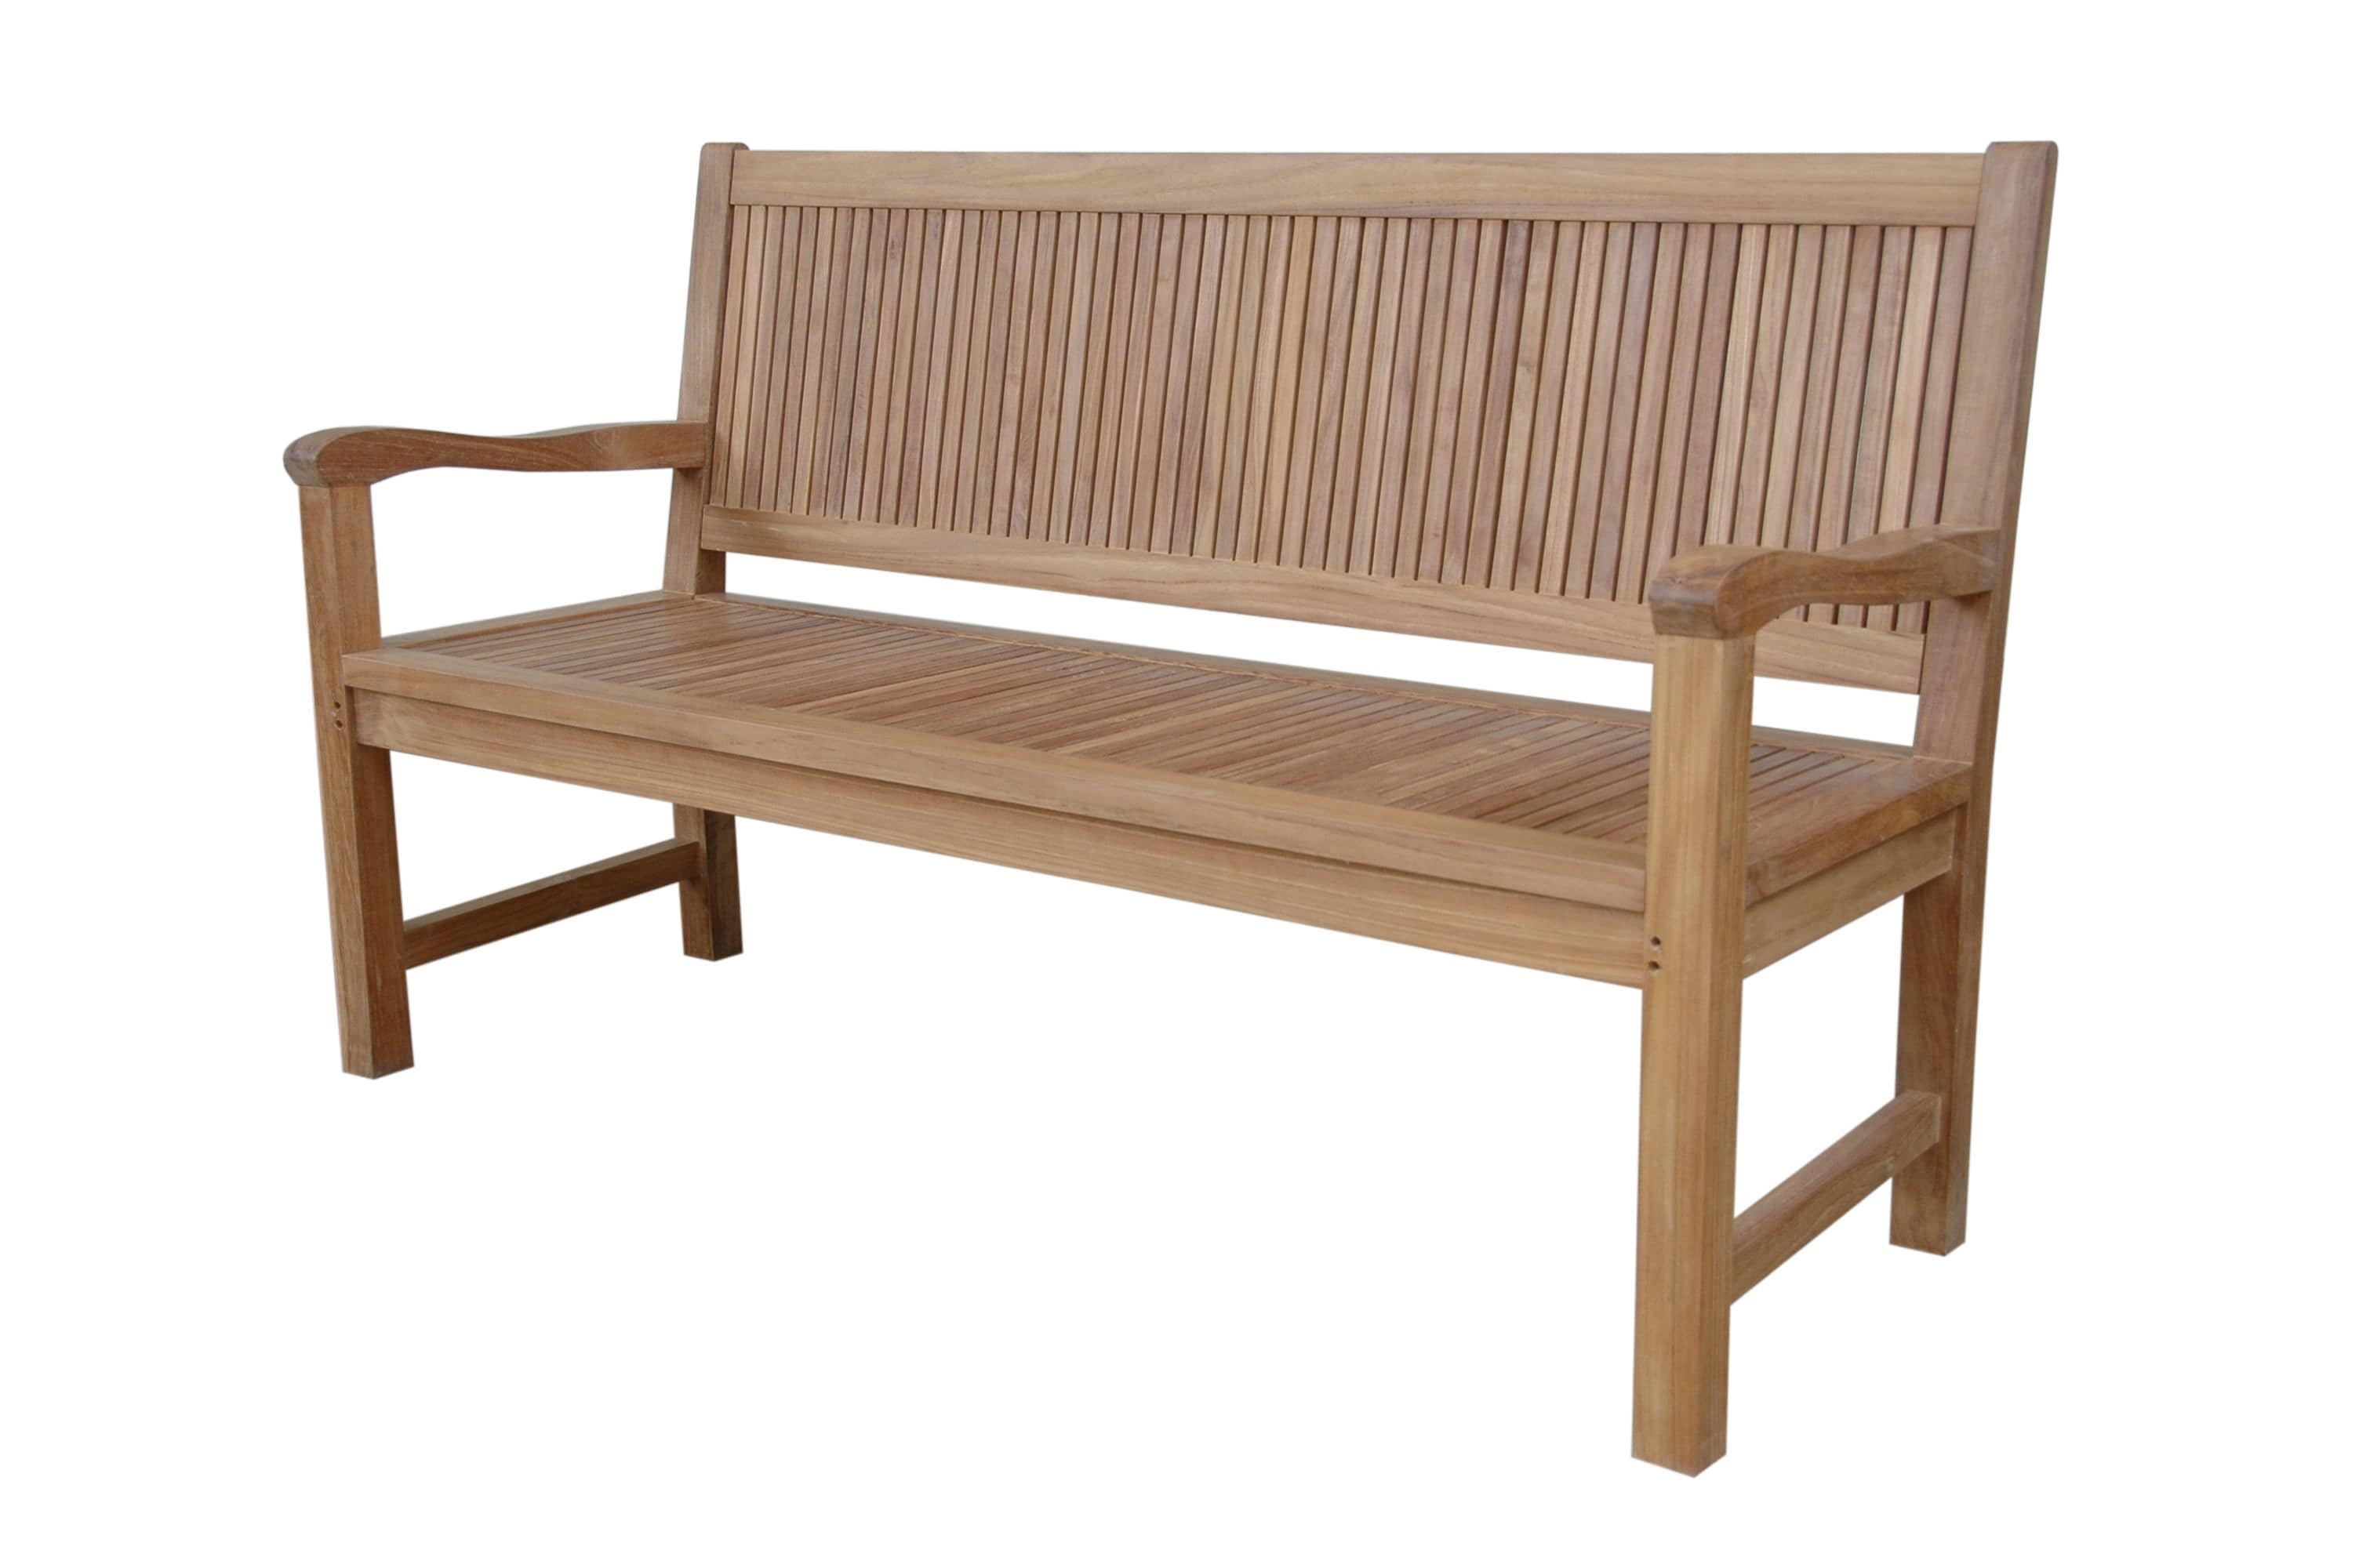 Anderson Teak Outdoor Bench Anderson Teak Chester 3-Seater Bench